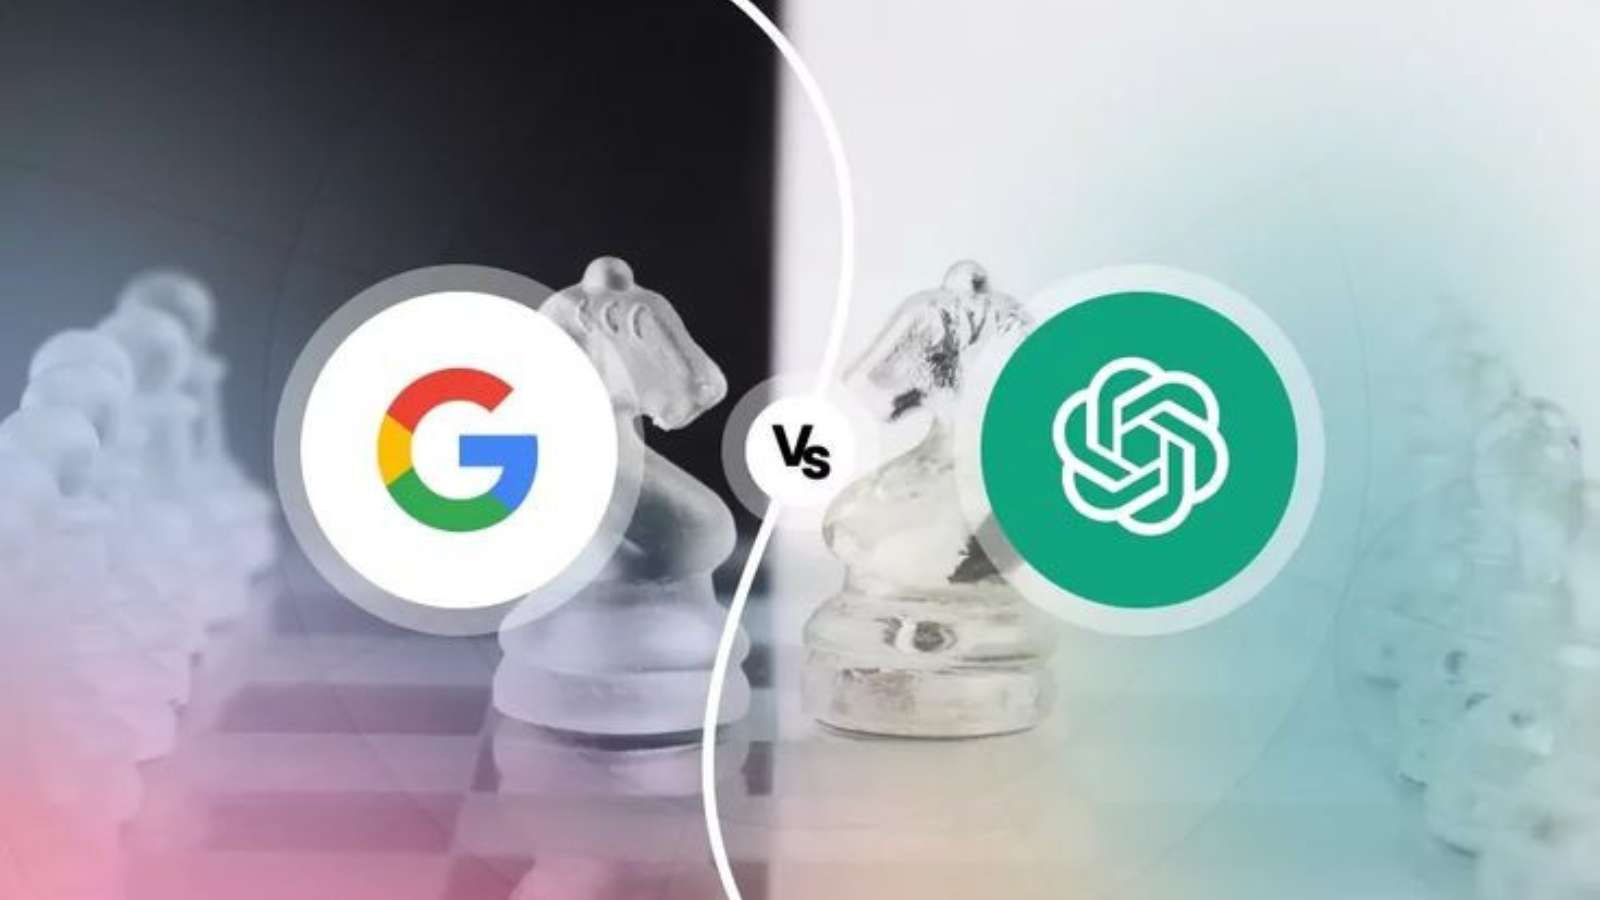 Which One is Better? Find the Differences between ChatGPT and Google Bard